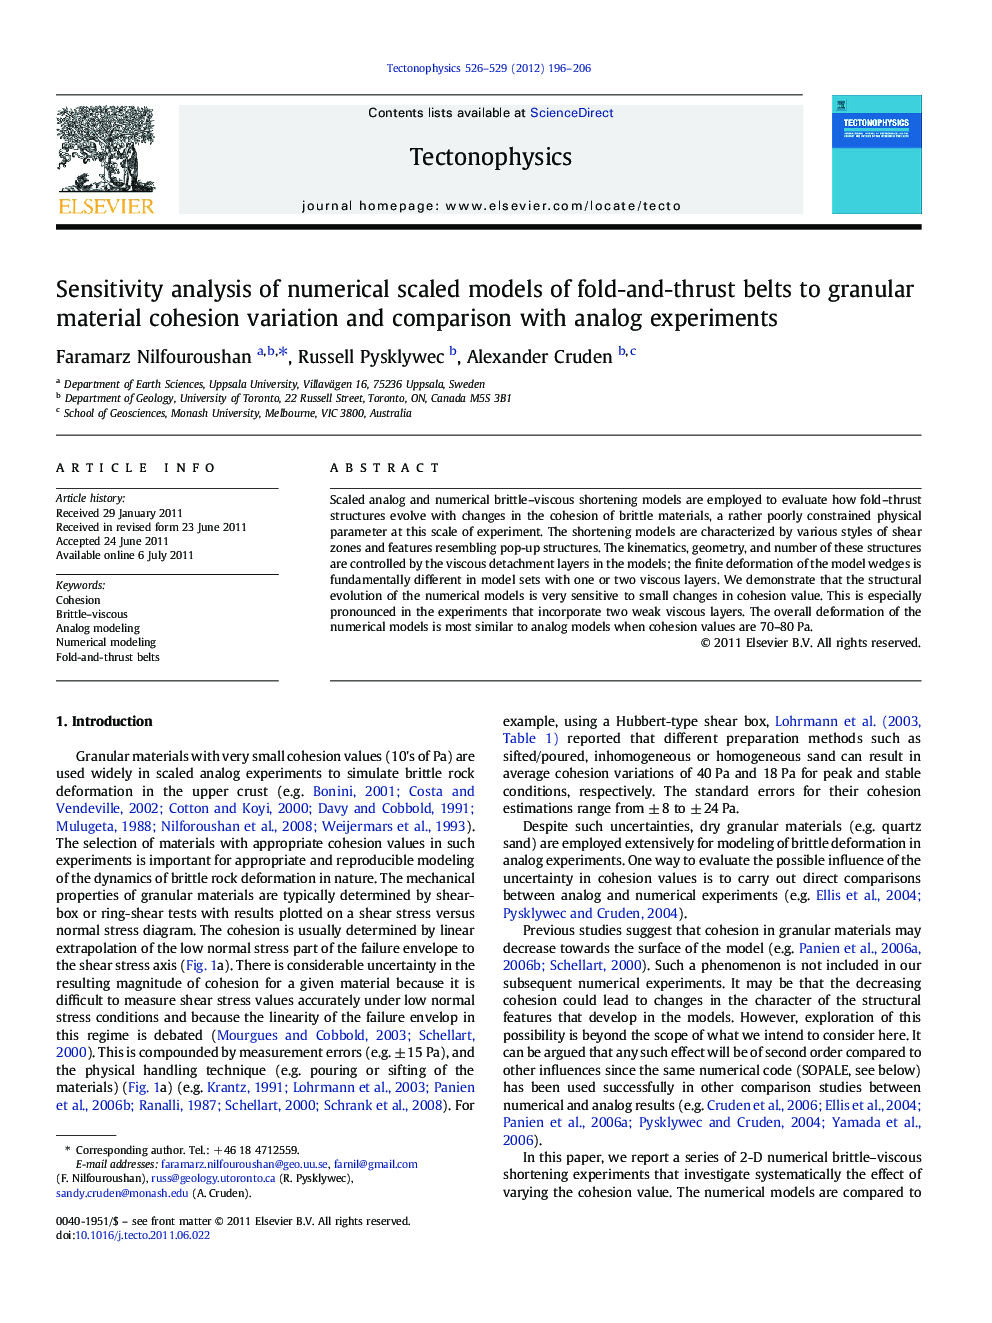 Sensitivity analysis of numerical scaled models of fold-and-thrust belts to granular material cohesion variation and comparison with analog experiments